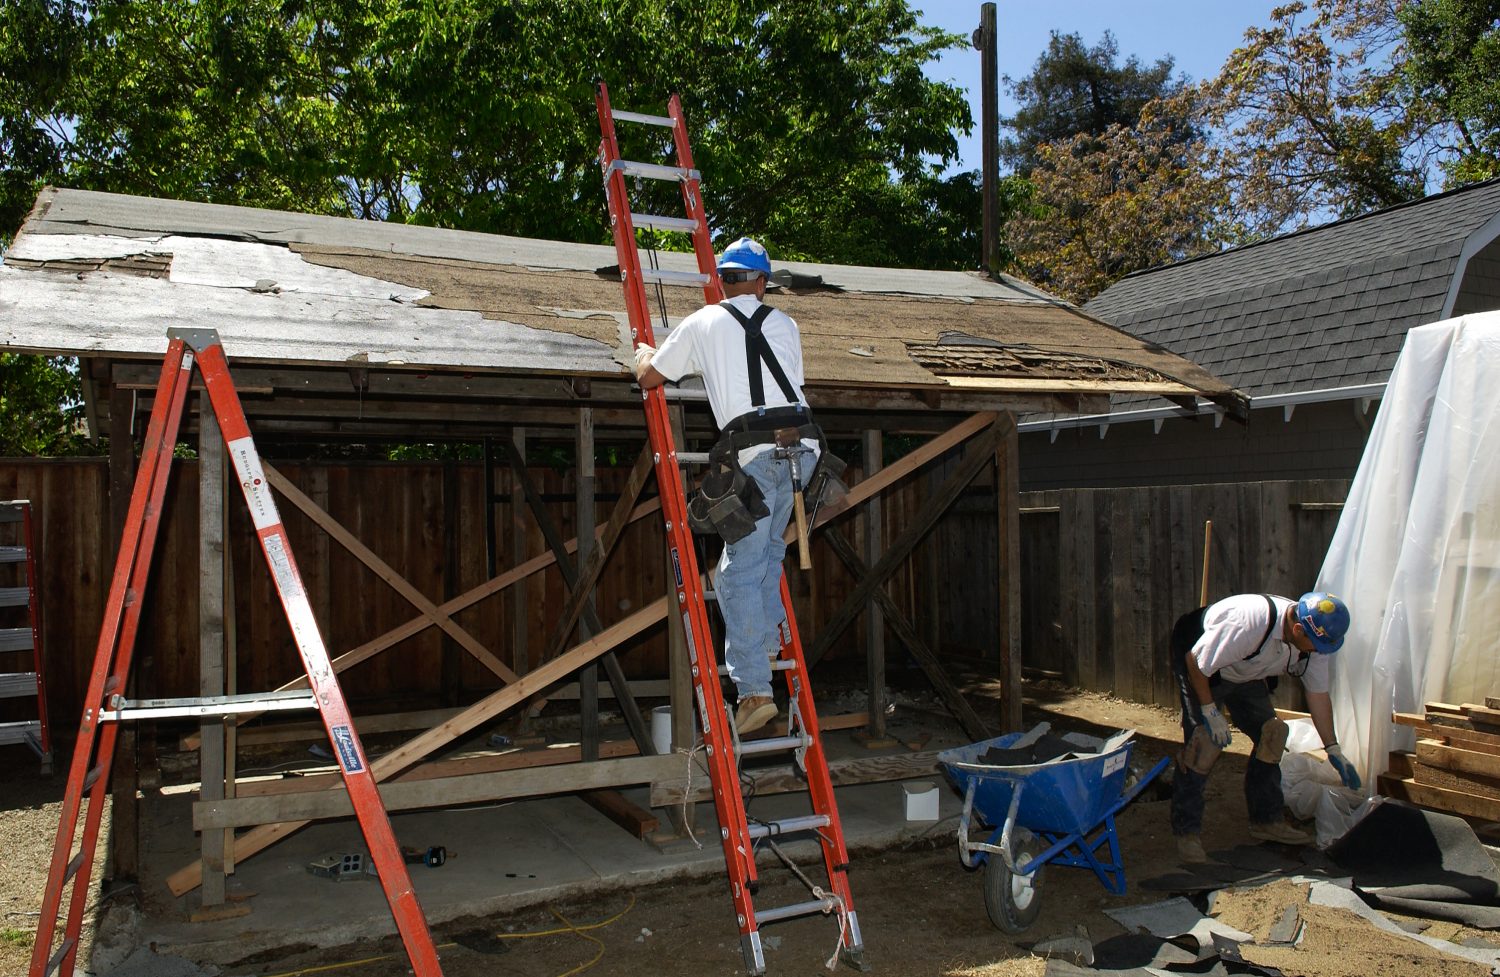 A worker on a ladder working on the garage renovation at Addison Avenue.